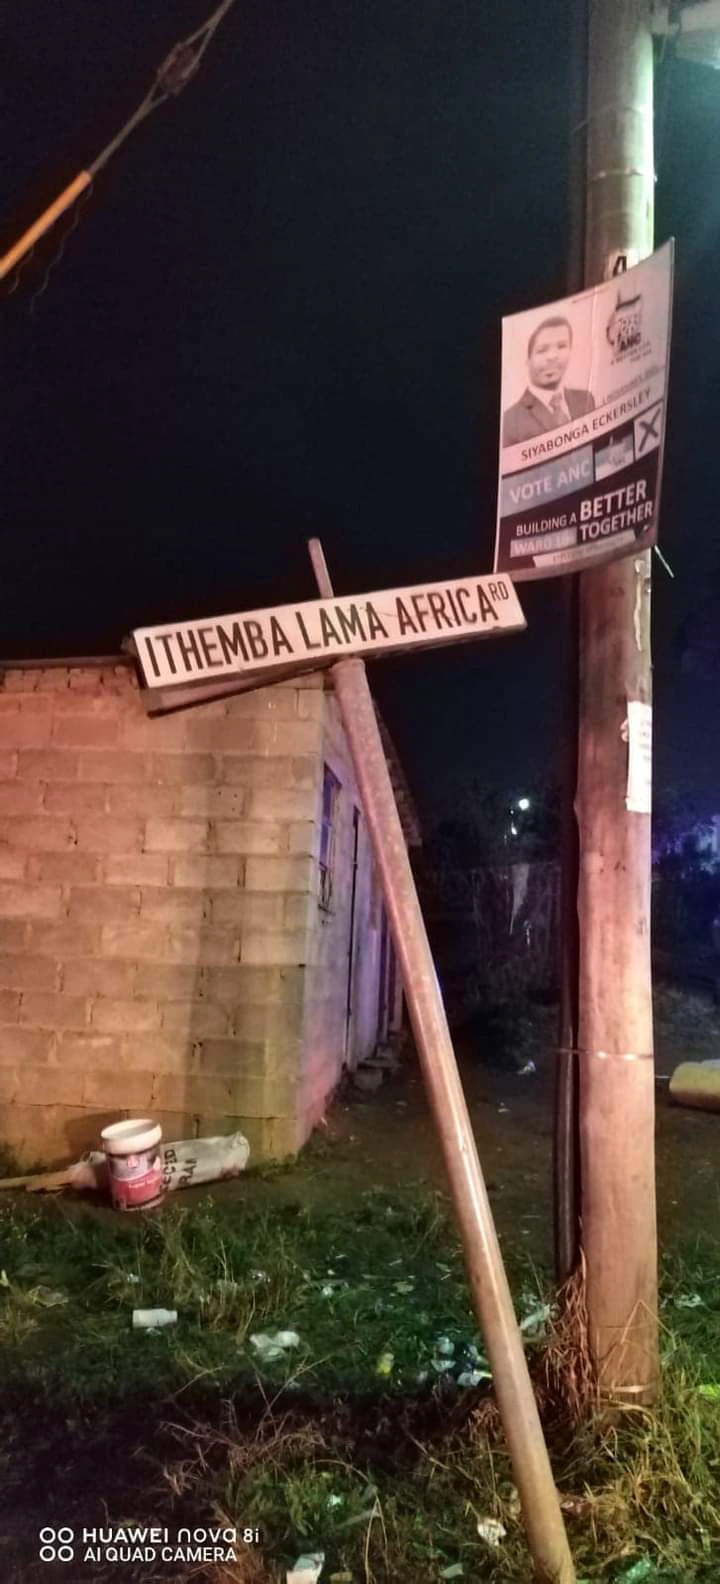 This is what residents of Waterloo woke up to this morning at around 01:00 am 2